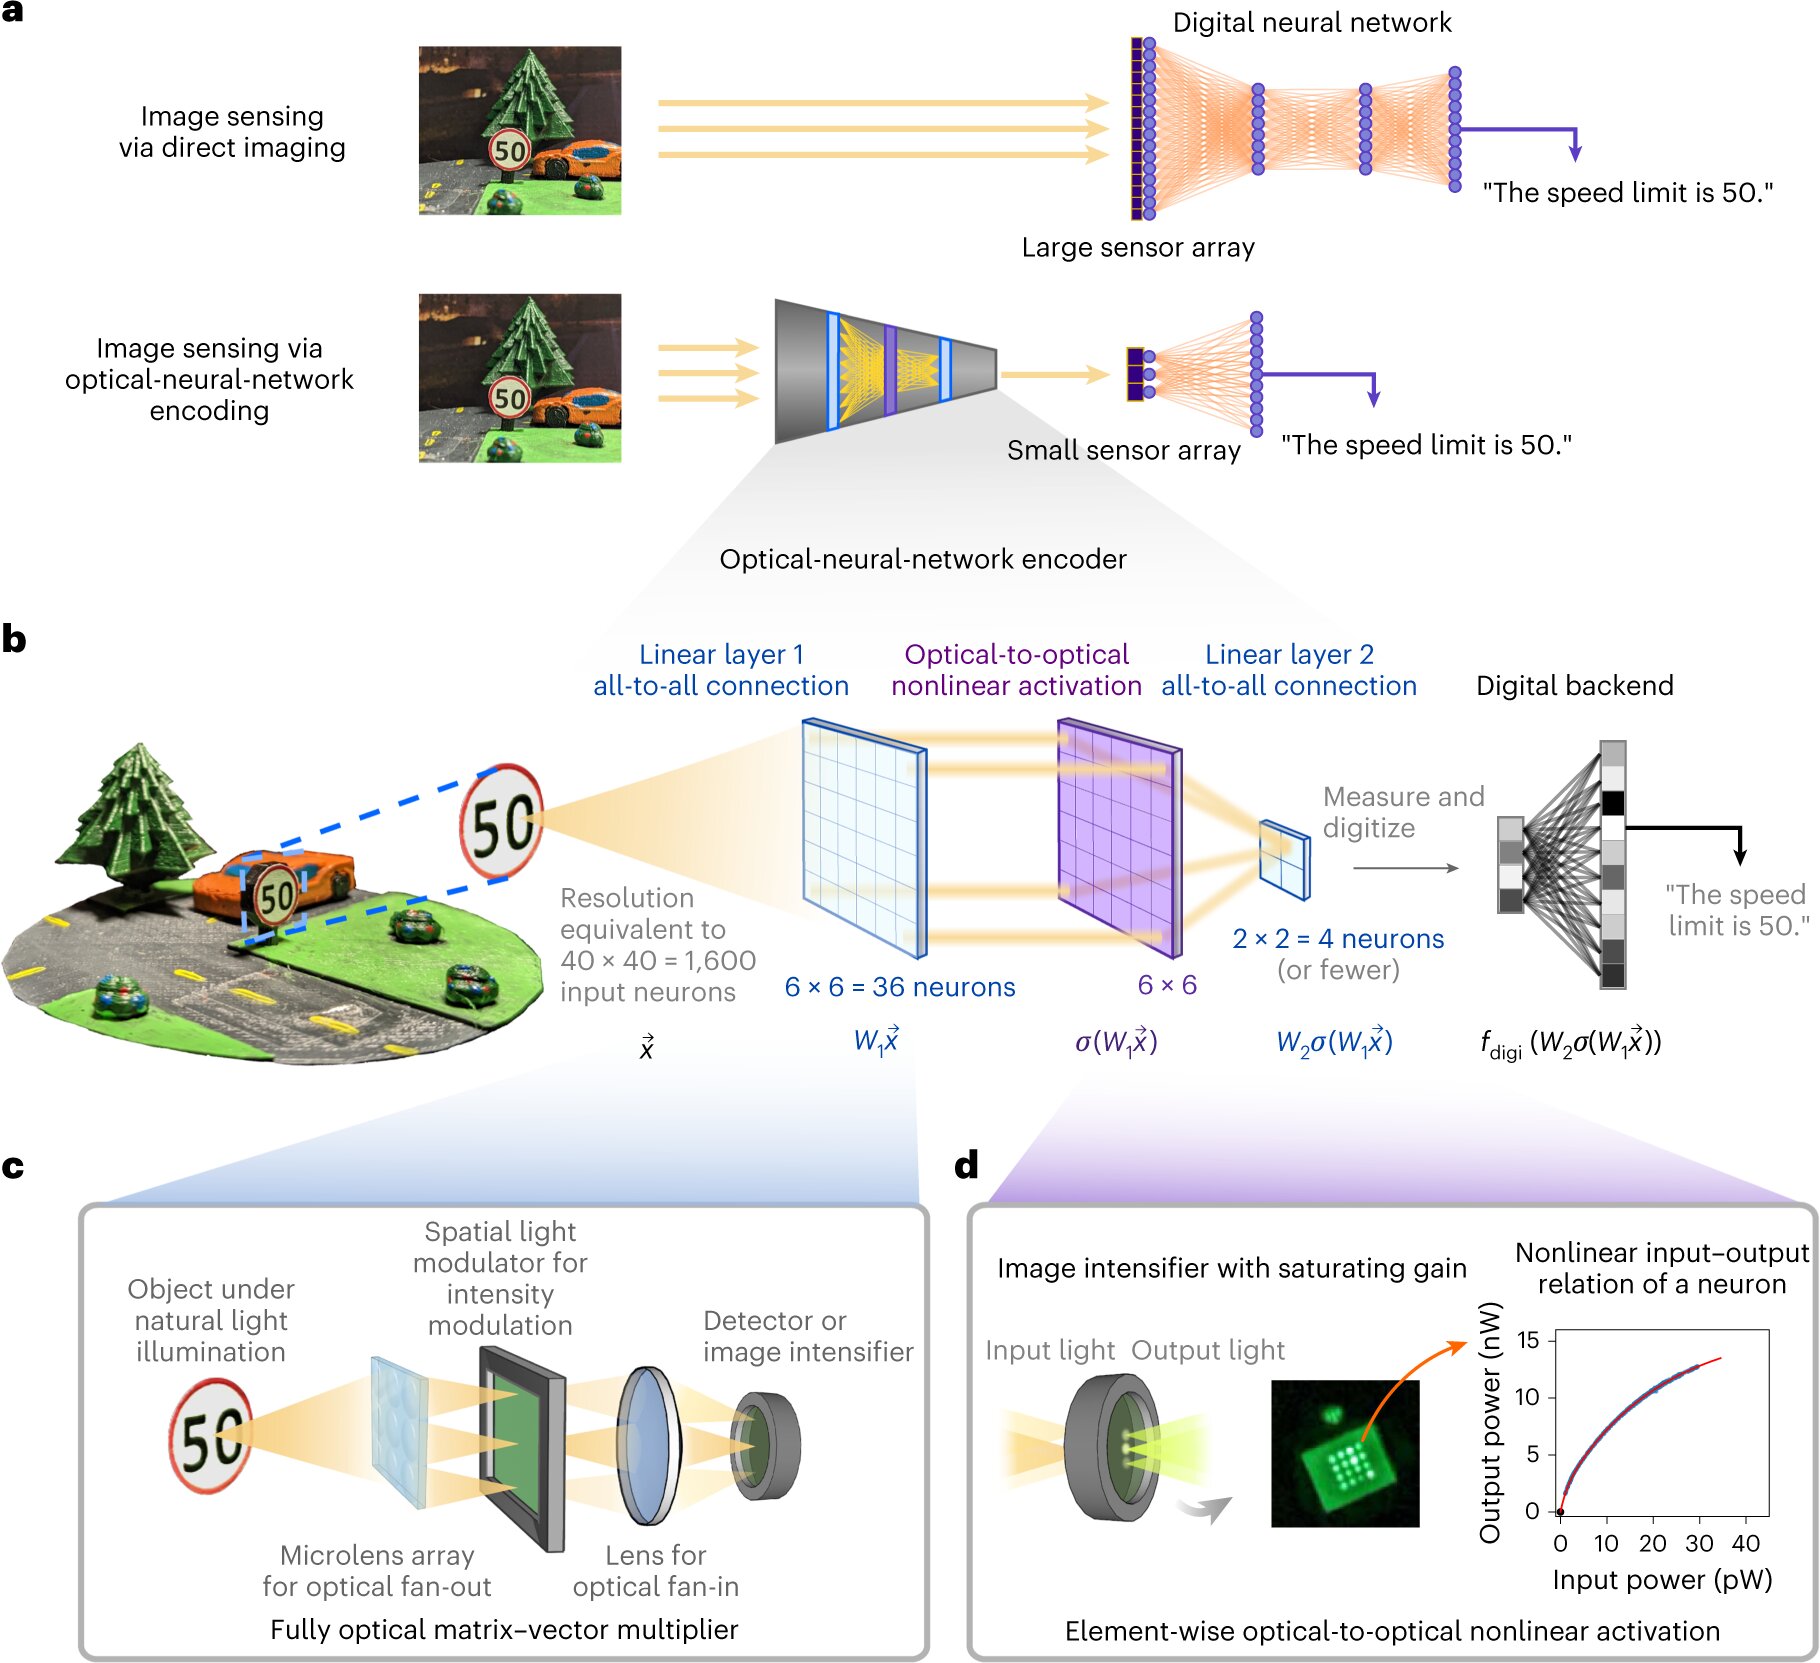 Optical neural networks hold promise for image processing